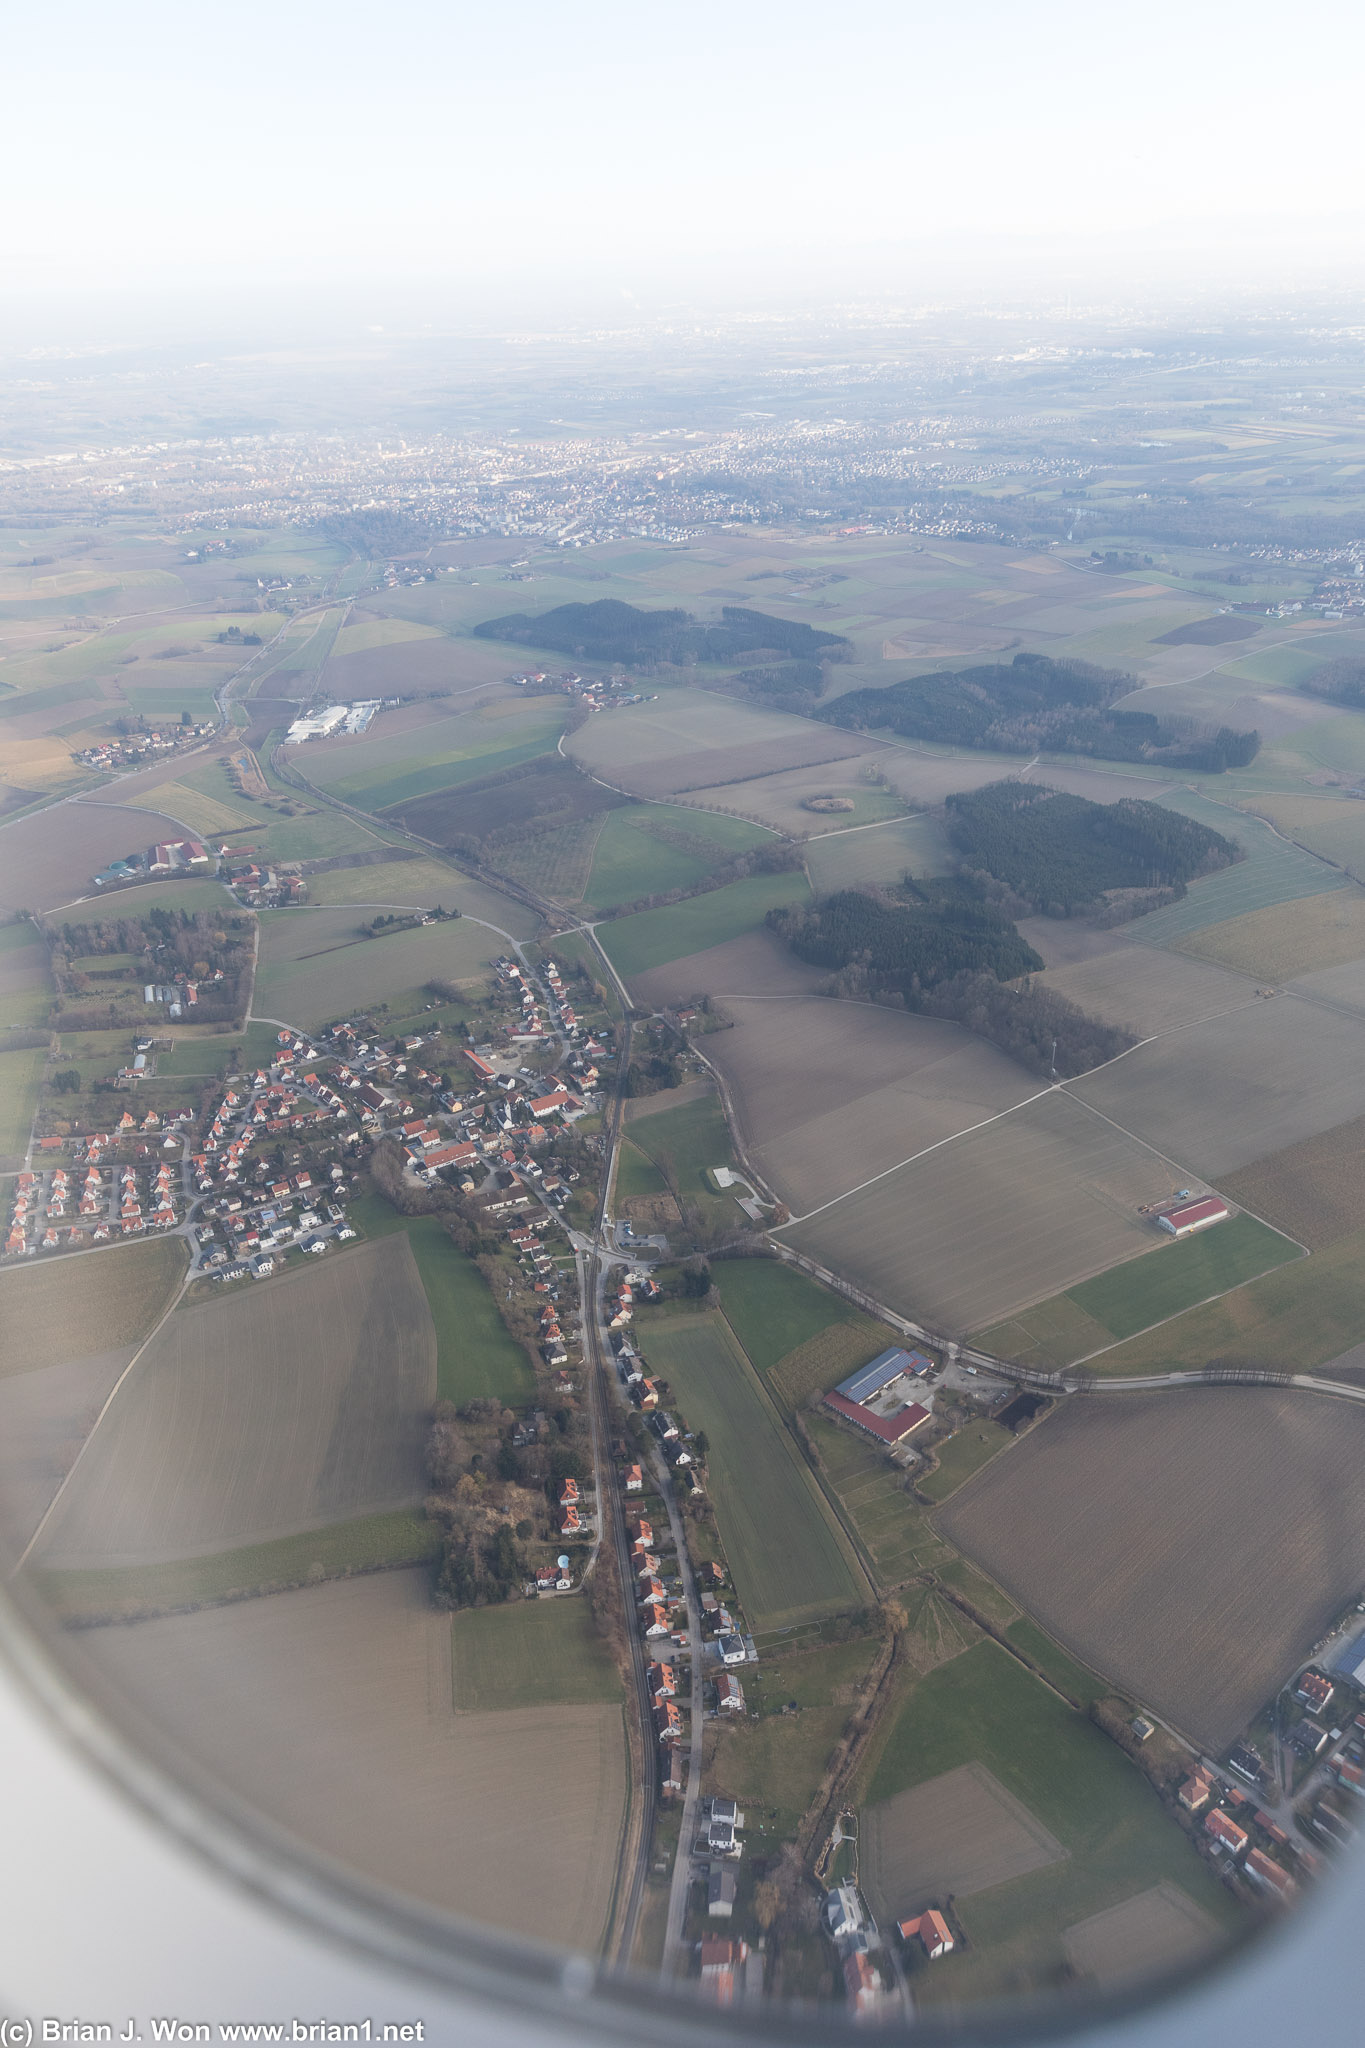 And for a change, the German countryside.